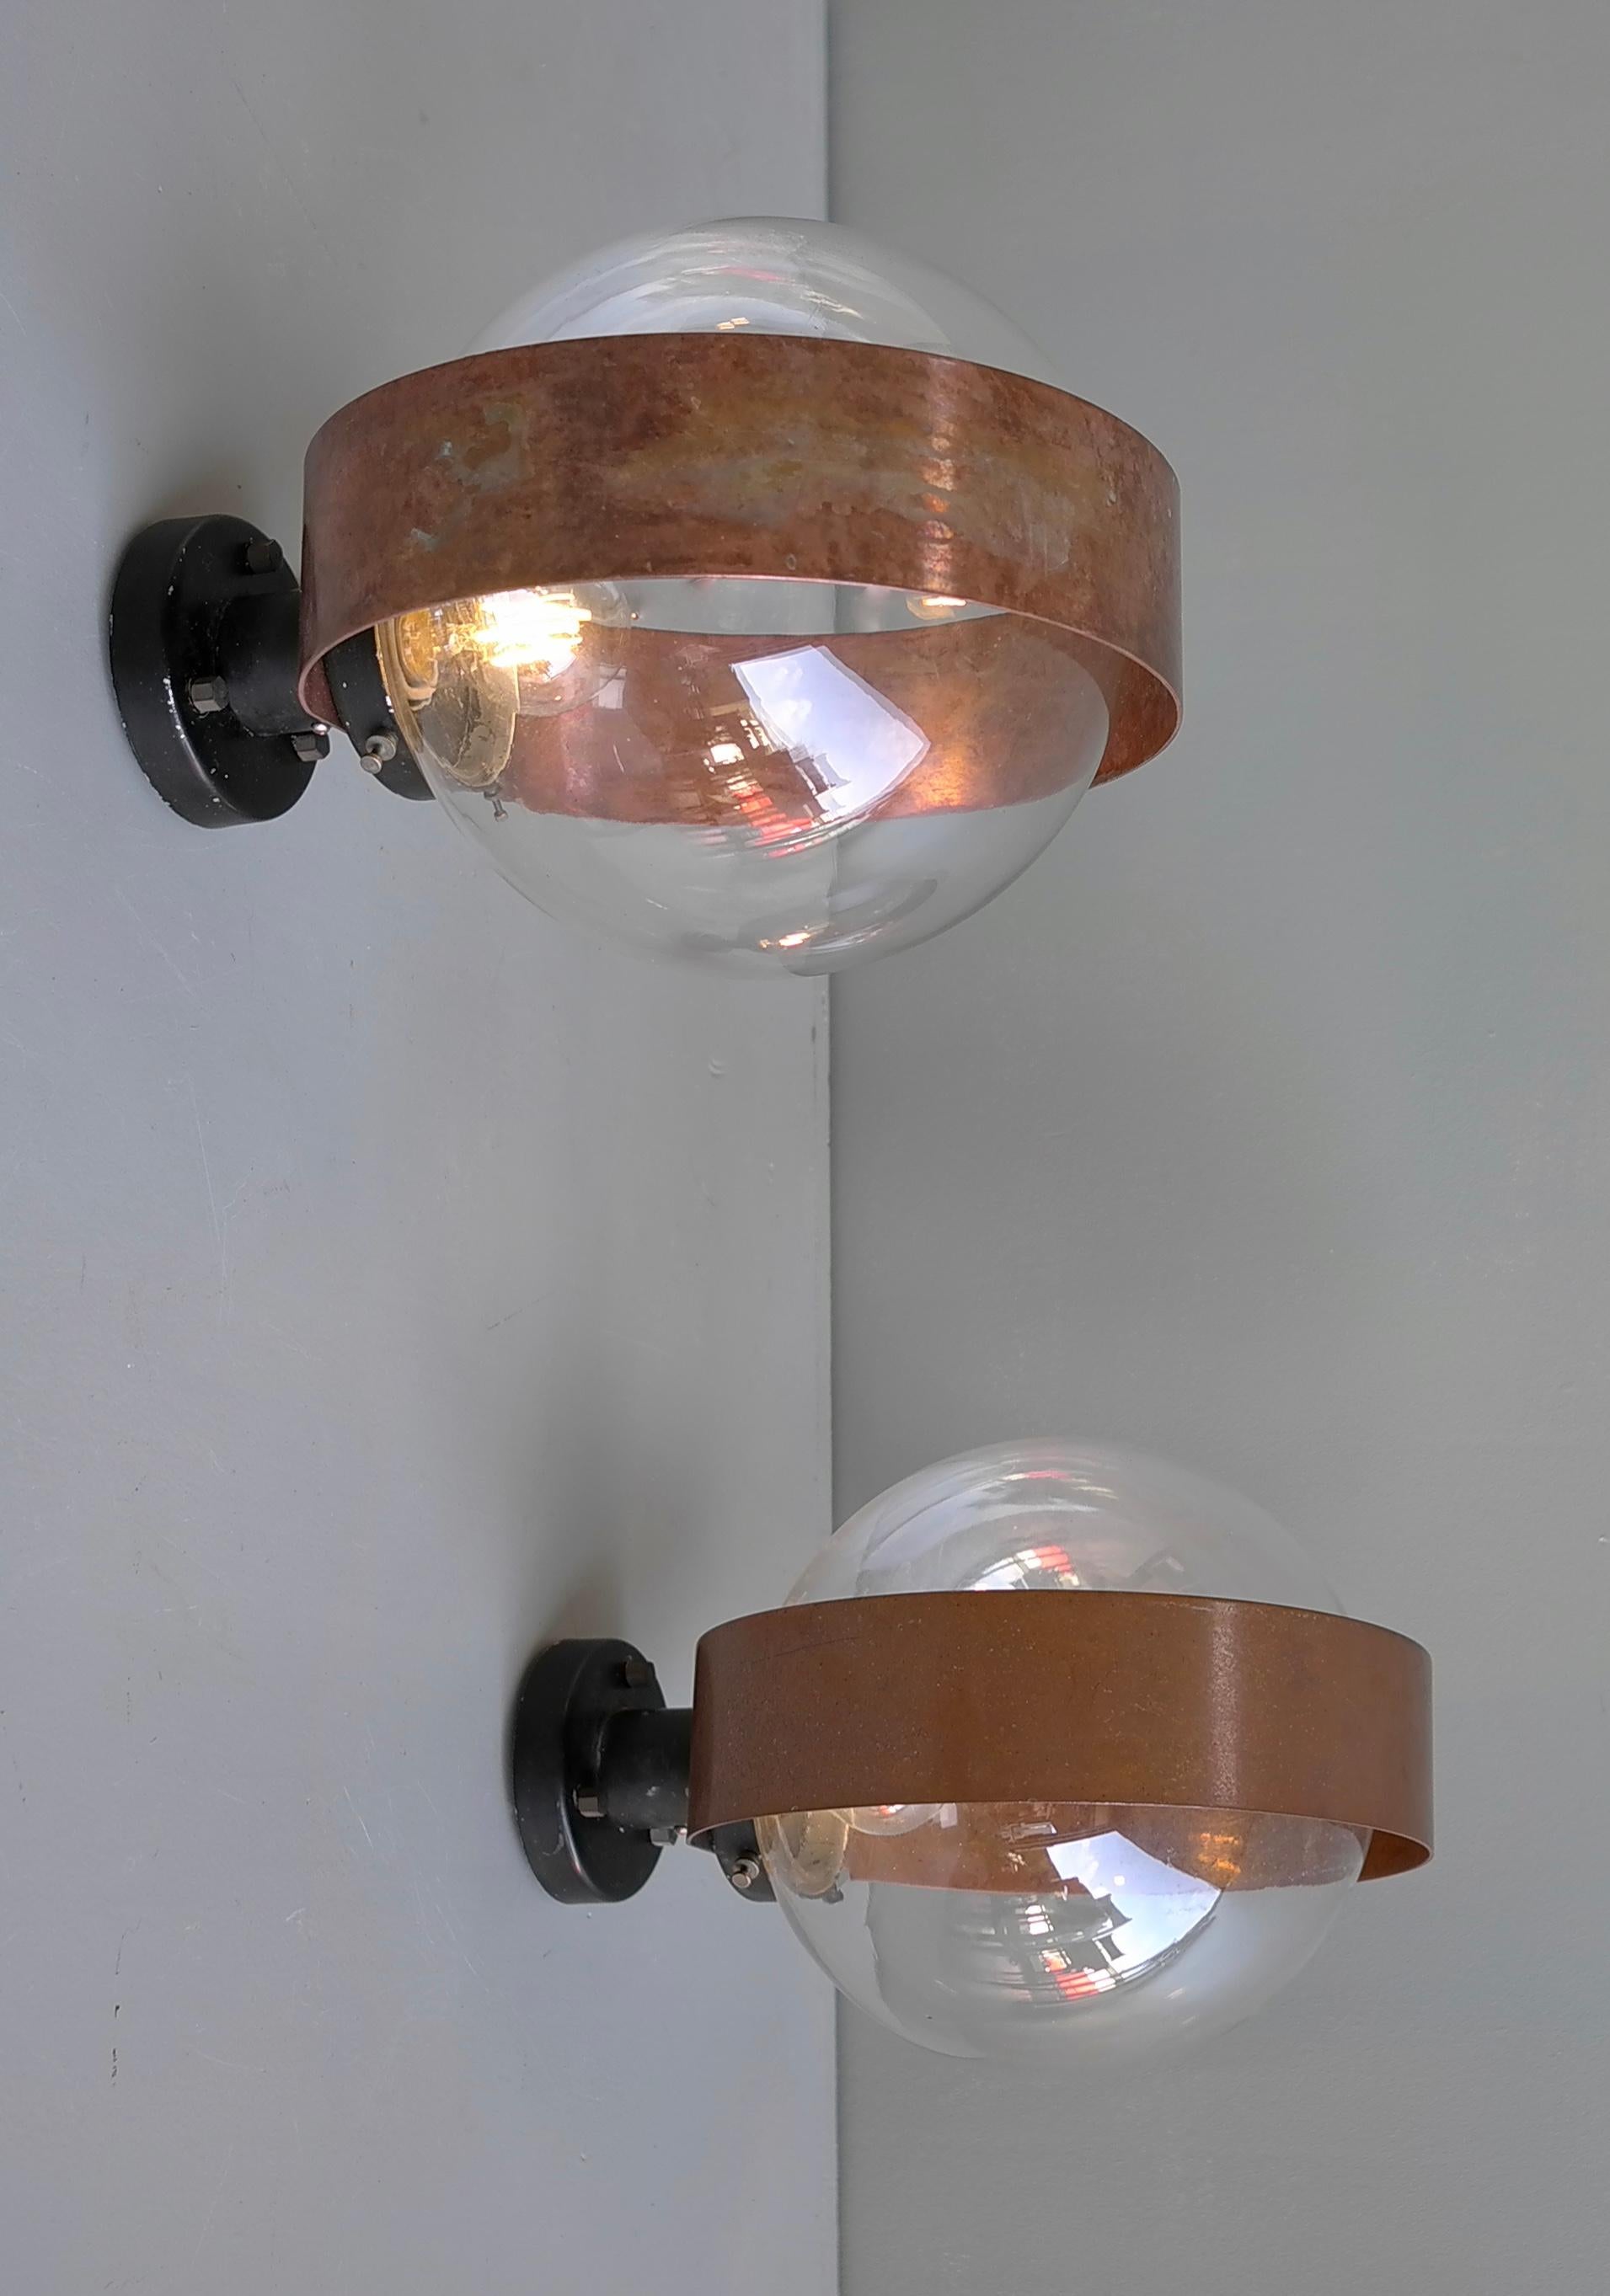 Metal Pair of Scandinavian Glass Ball Wall lamps with Copper Patina Rims, 1960's For Sale